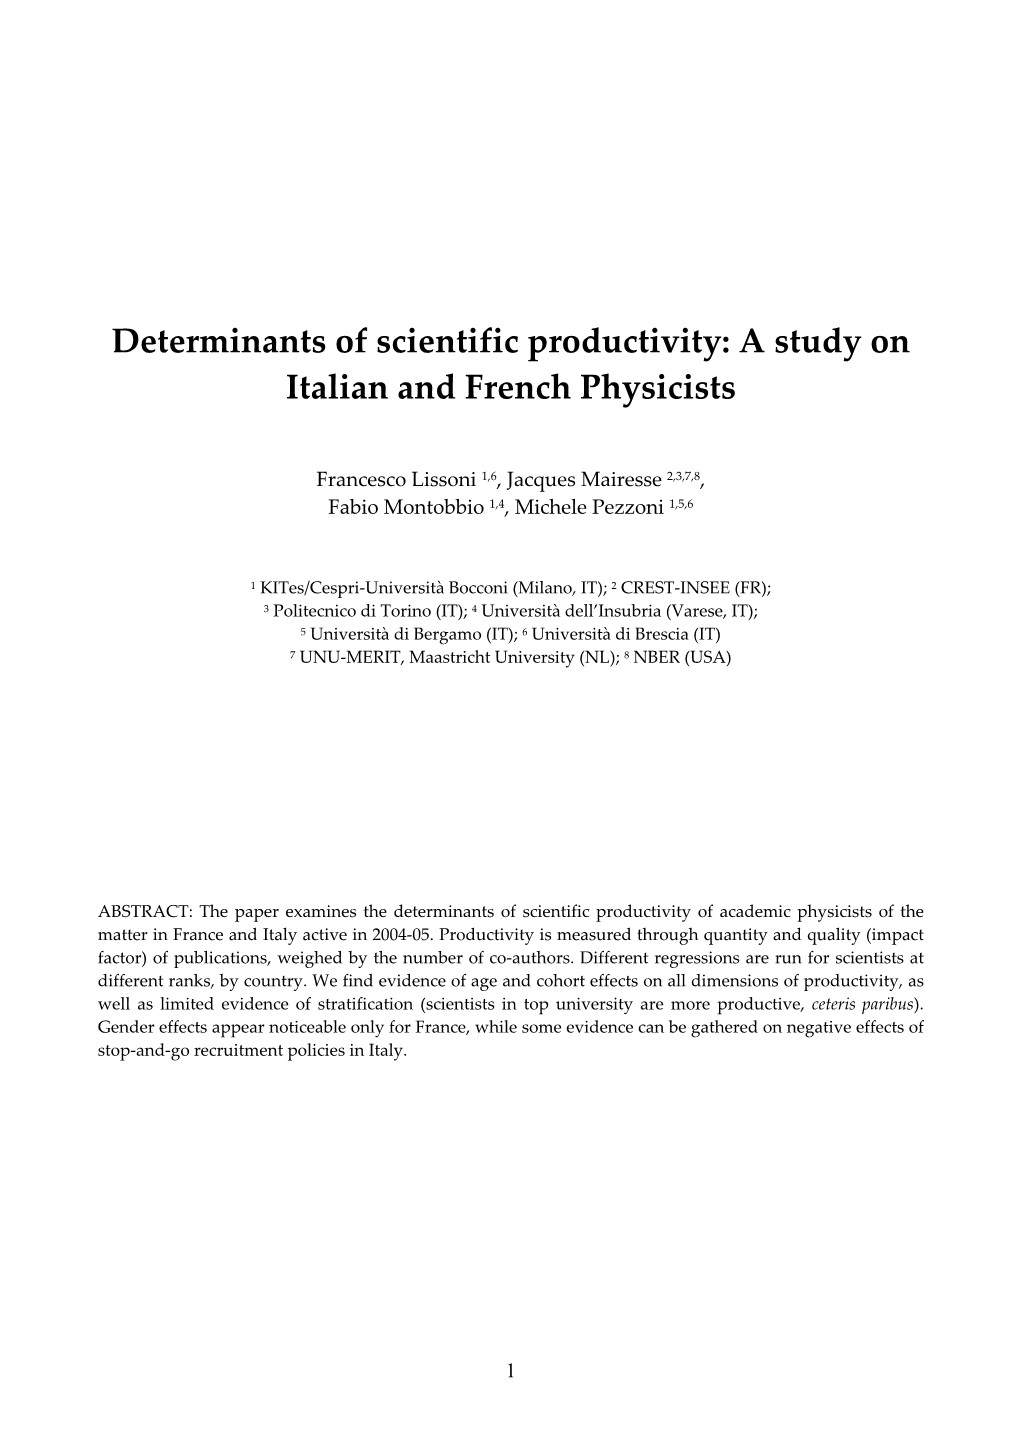 Determinants of Scientific Productivity: a Study on Italian and French Physicists